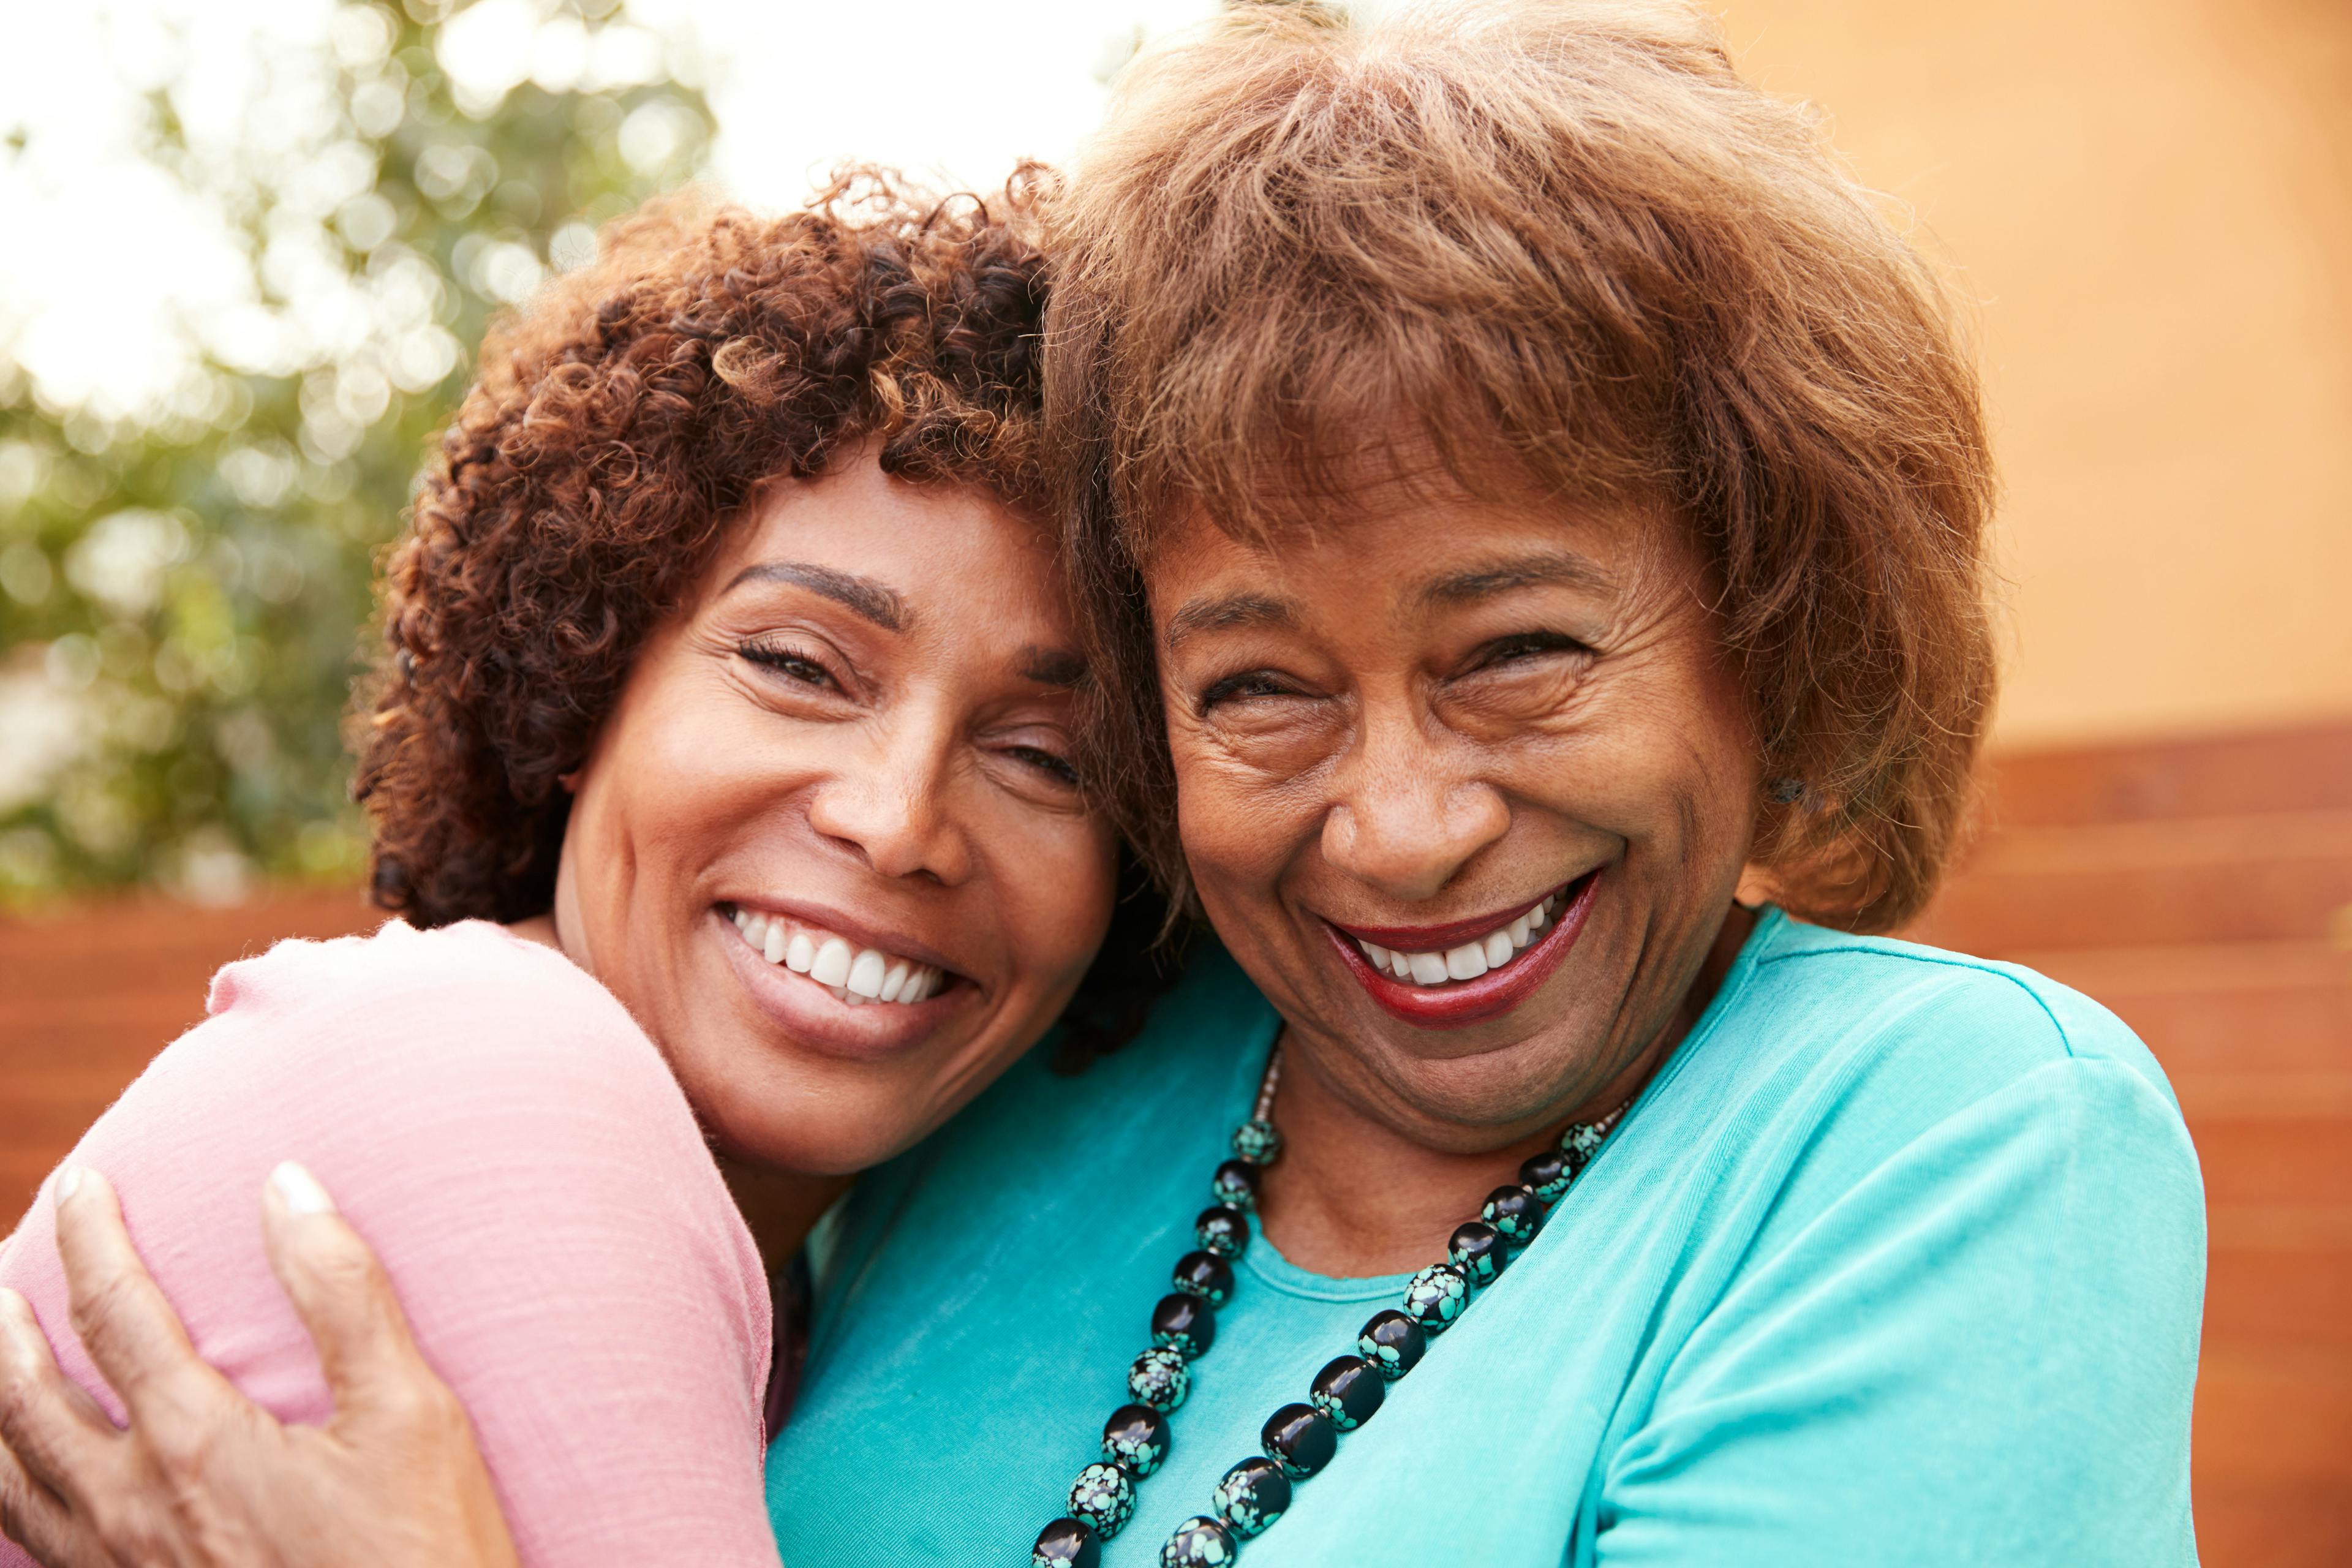 16 Caregivers Share How You Can Help Them